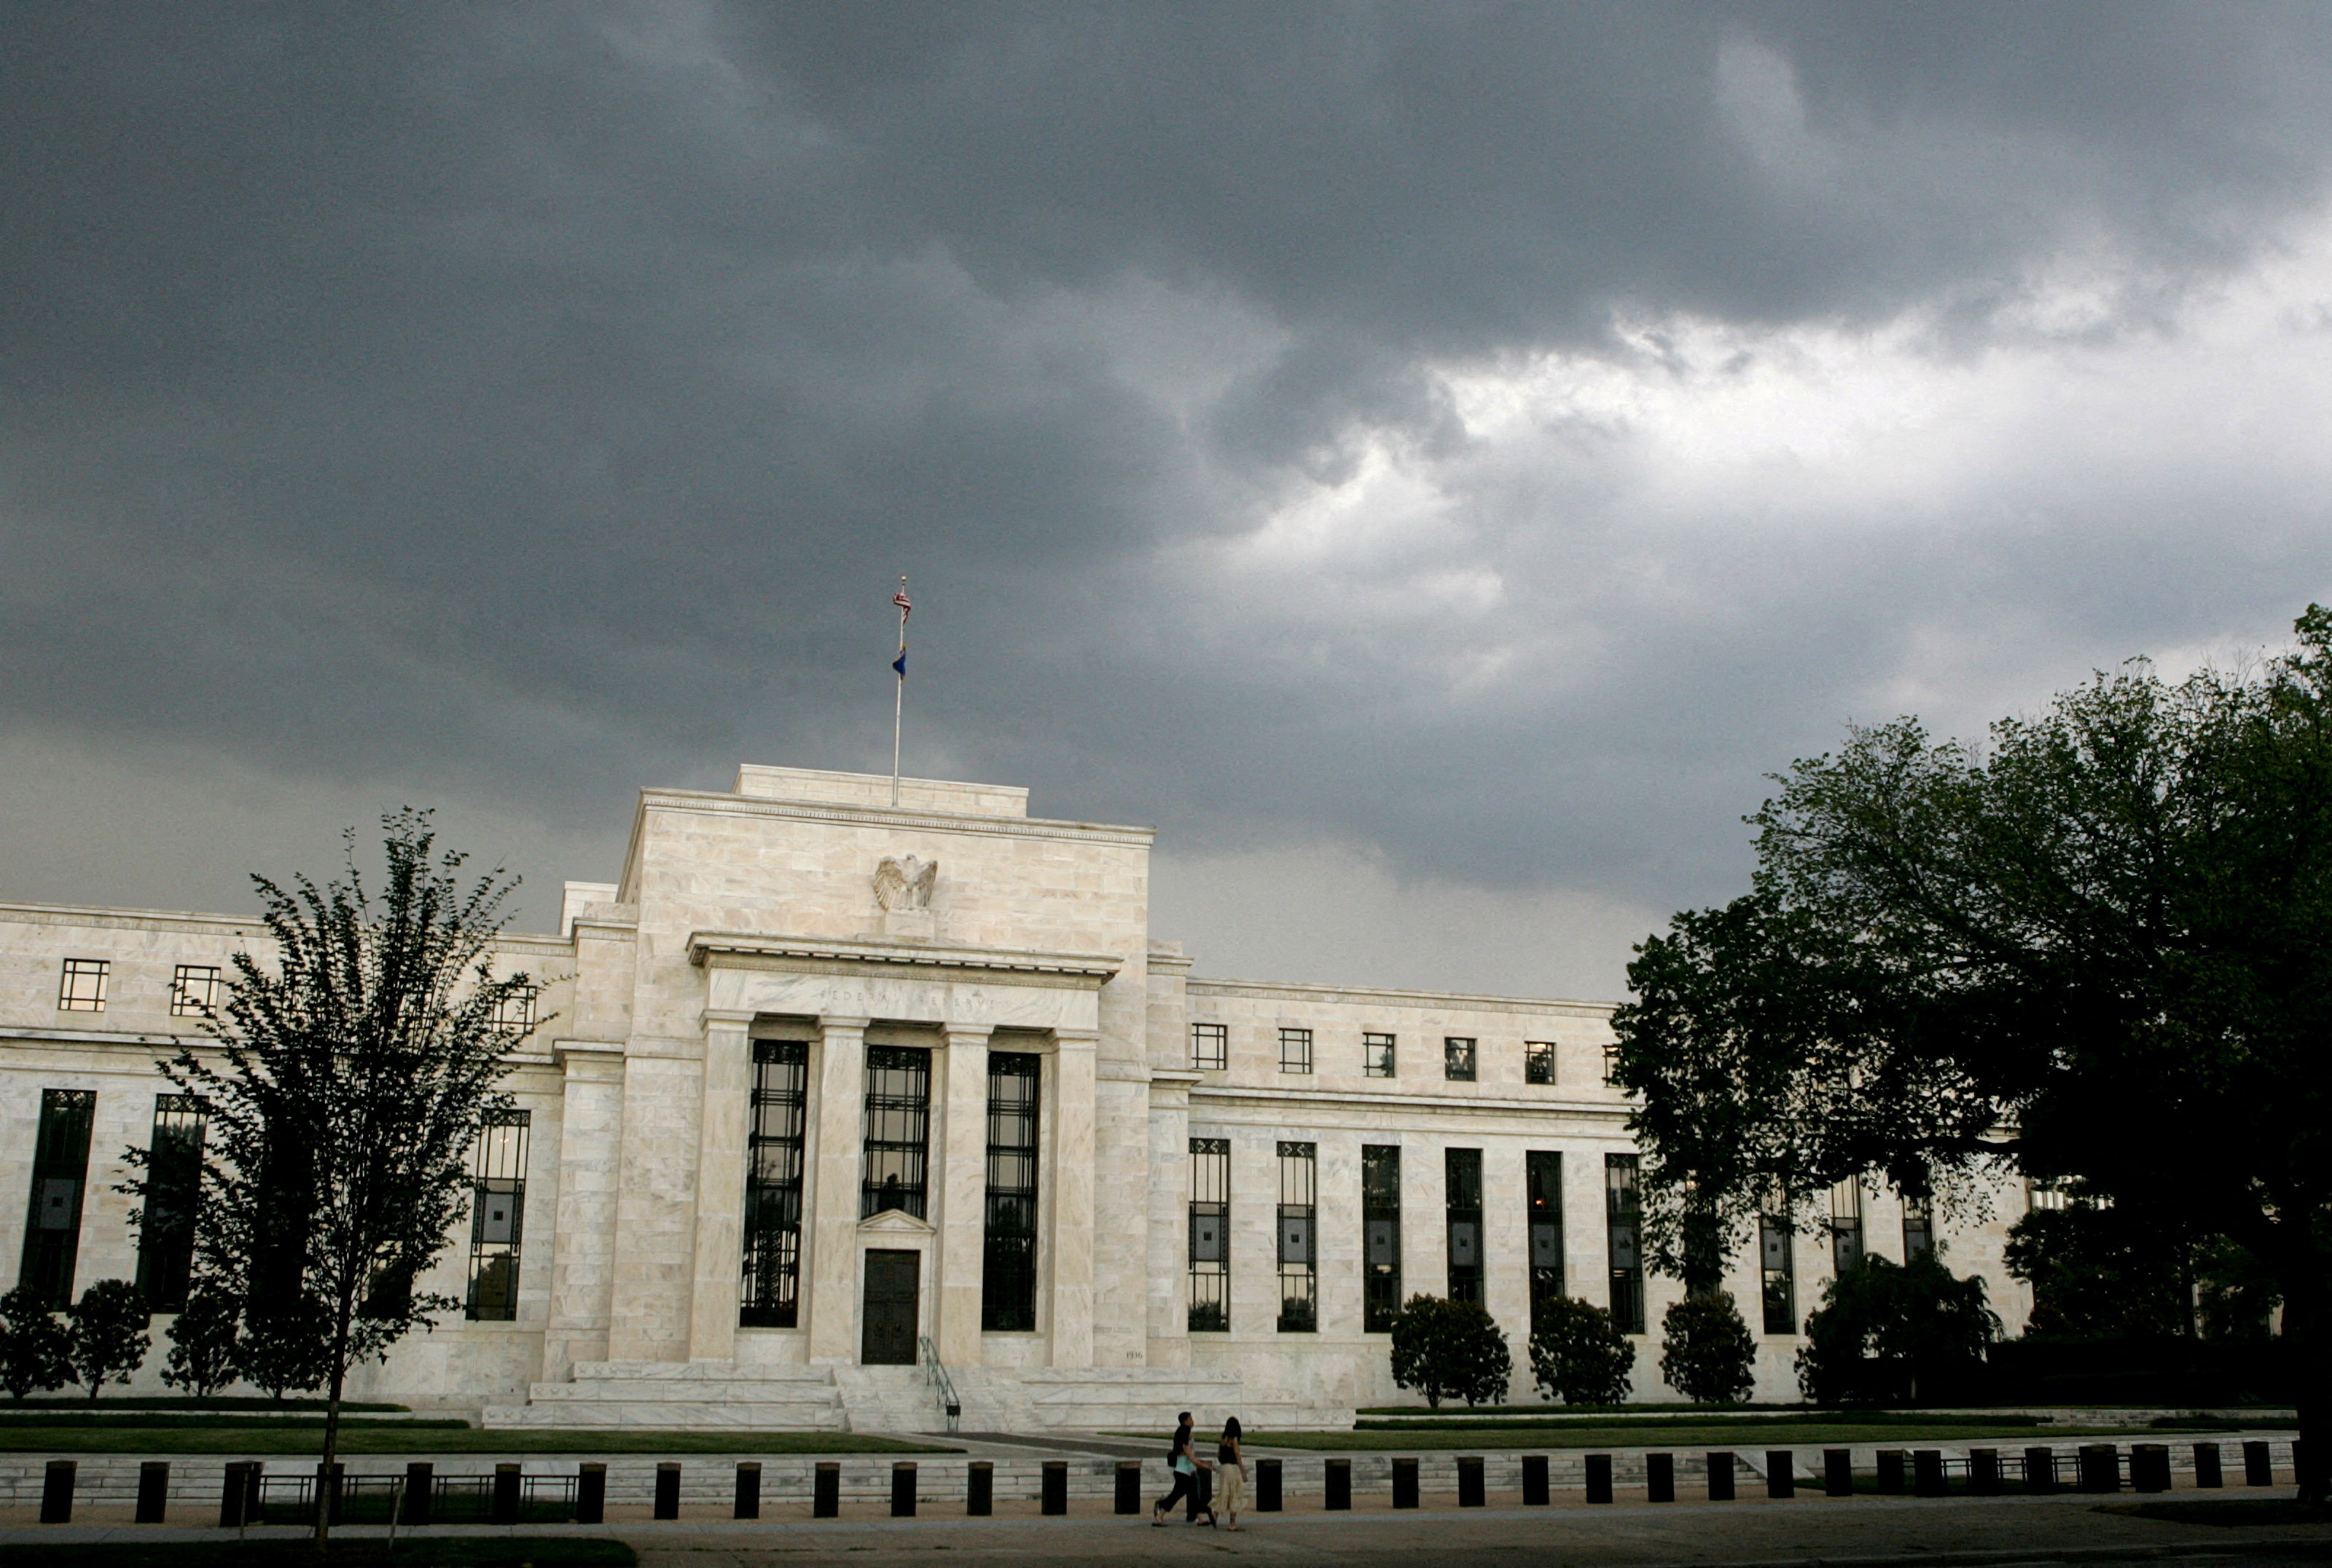 Storm clouds gather over U.S. Federal Reserve Building before evening thunderstorm in Washington